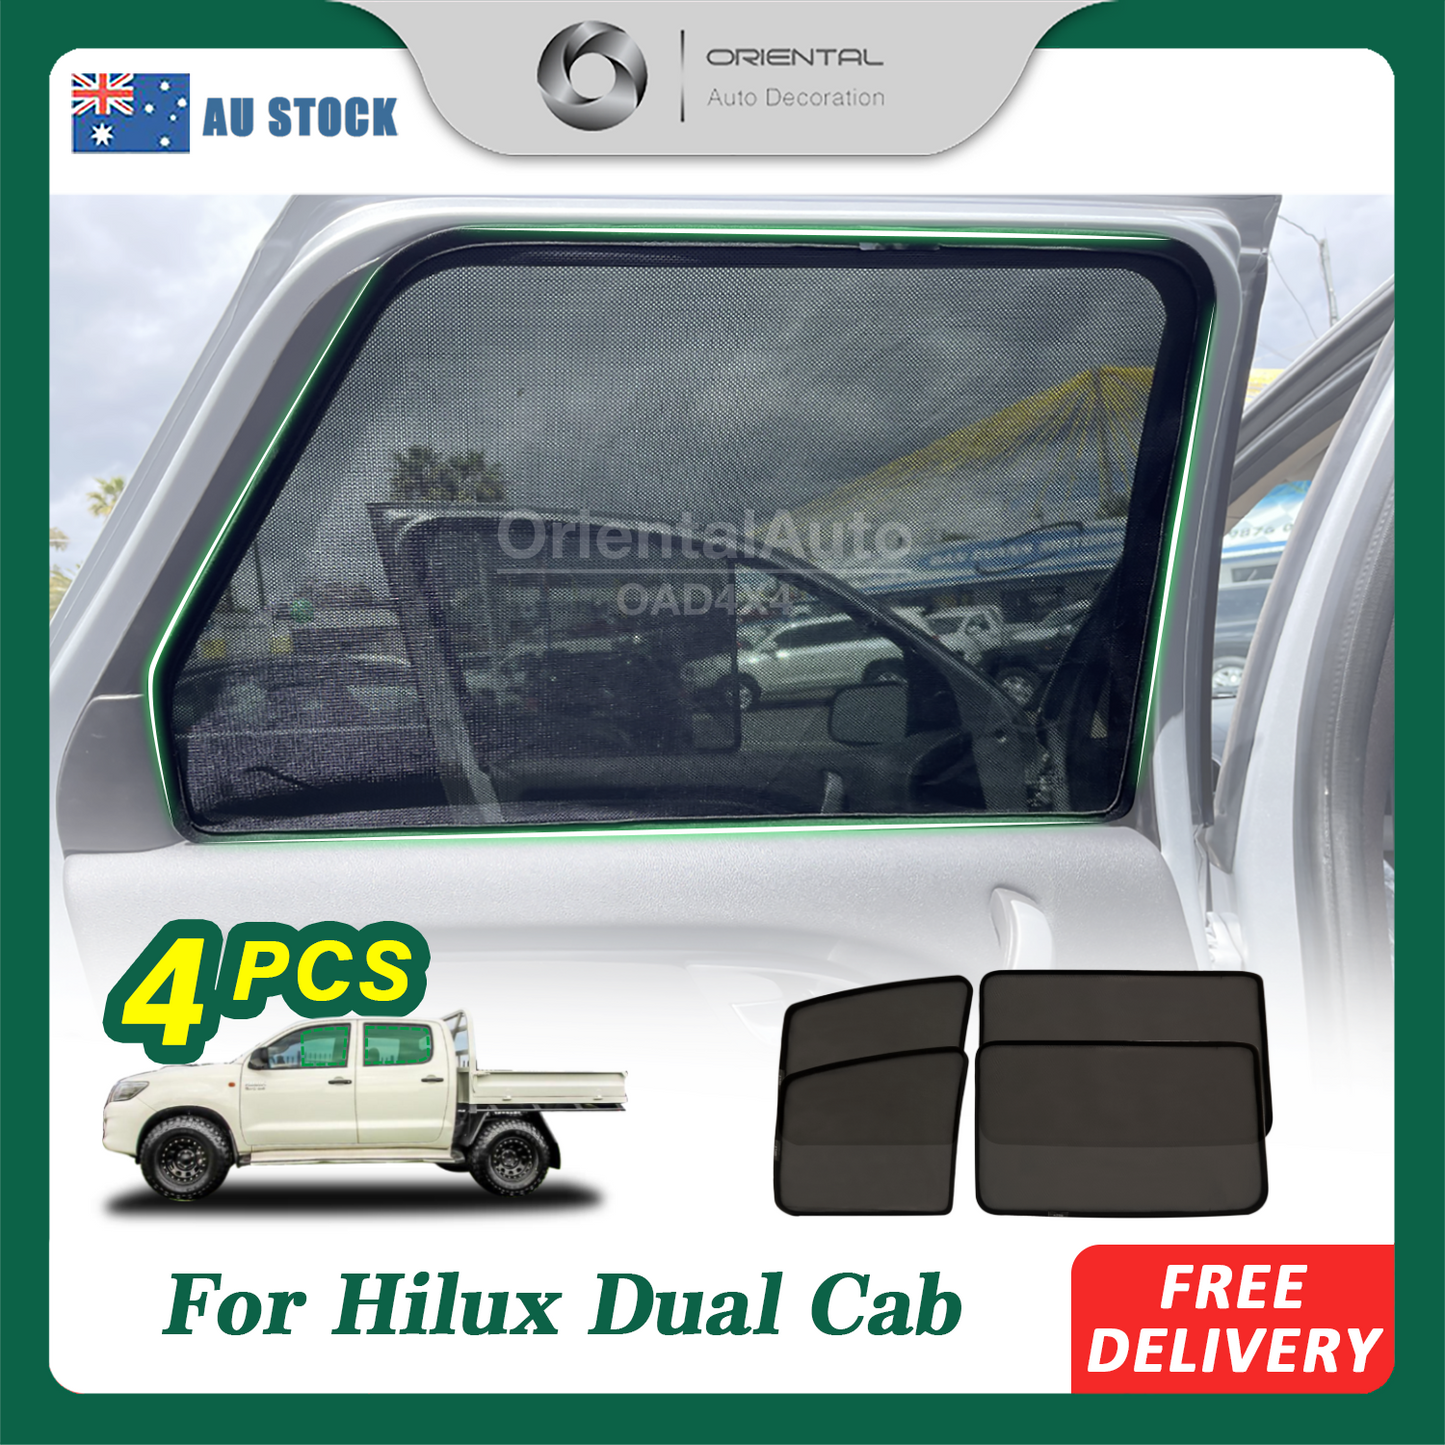 4PCS Magnetic Sun Shade for Toyota Hilux Dual Cab 2005-2015 Window Sun Shades UV Protection Mesh Cover